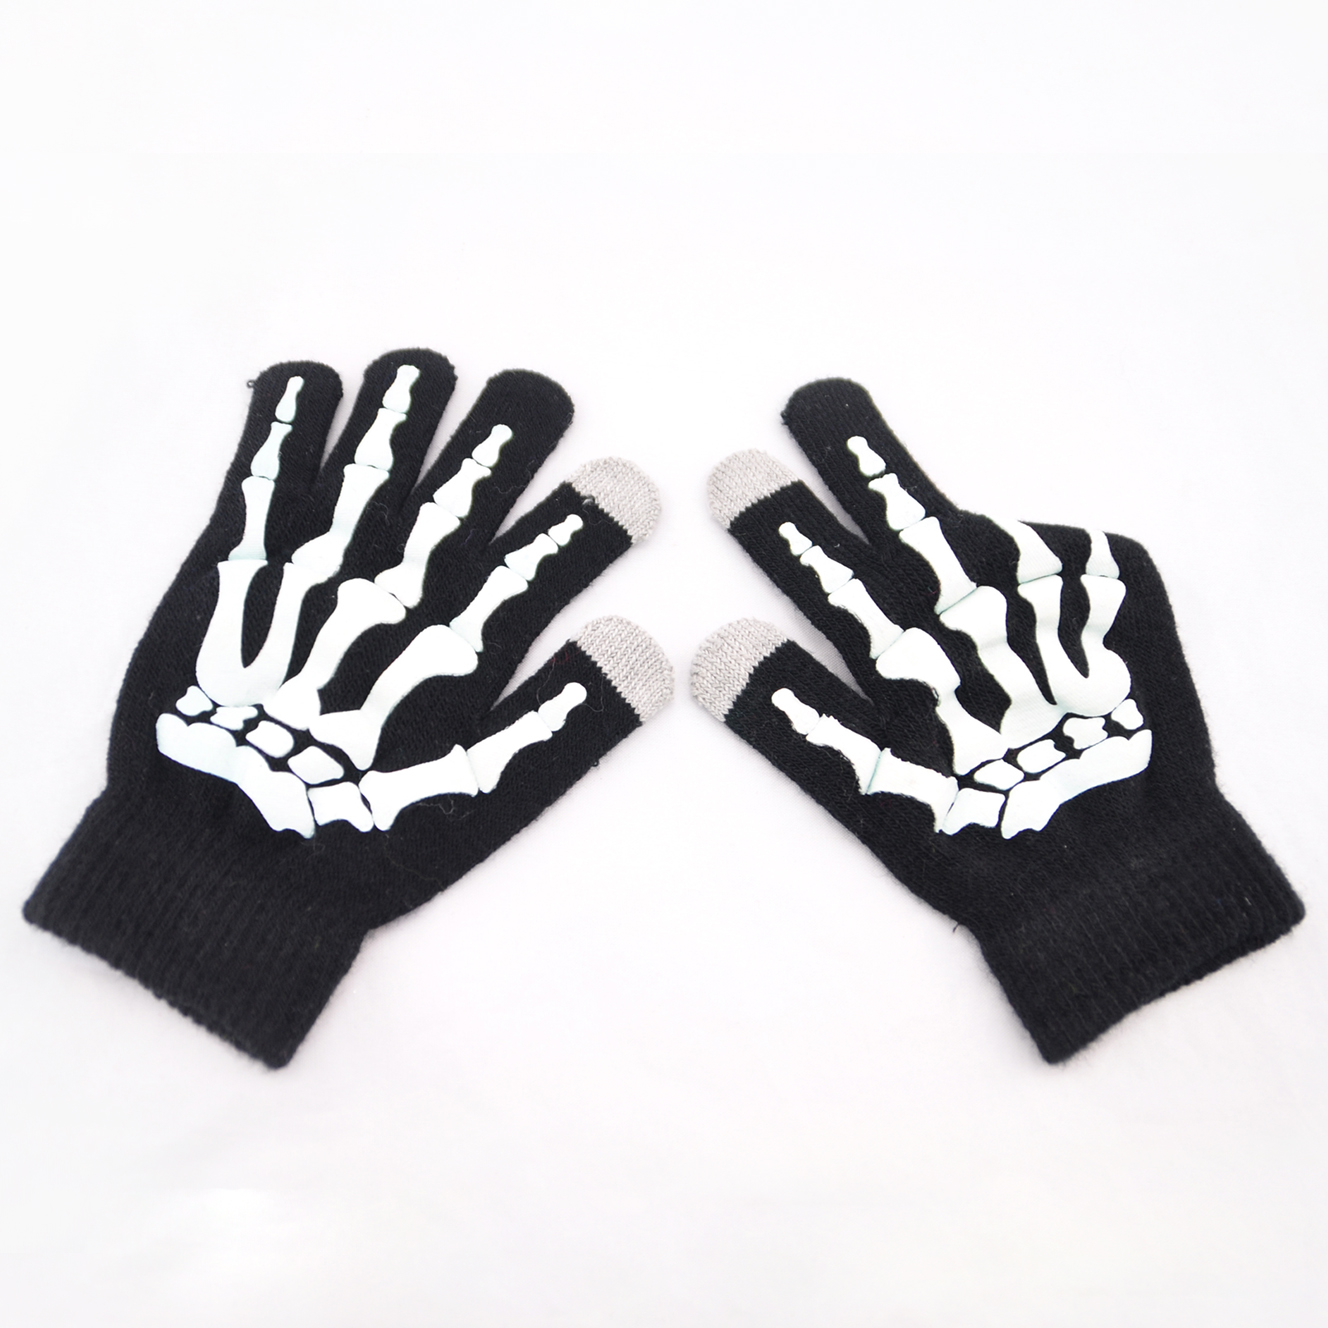 Touch screen glove ,Home Textile Products